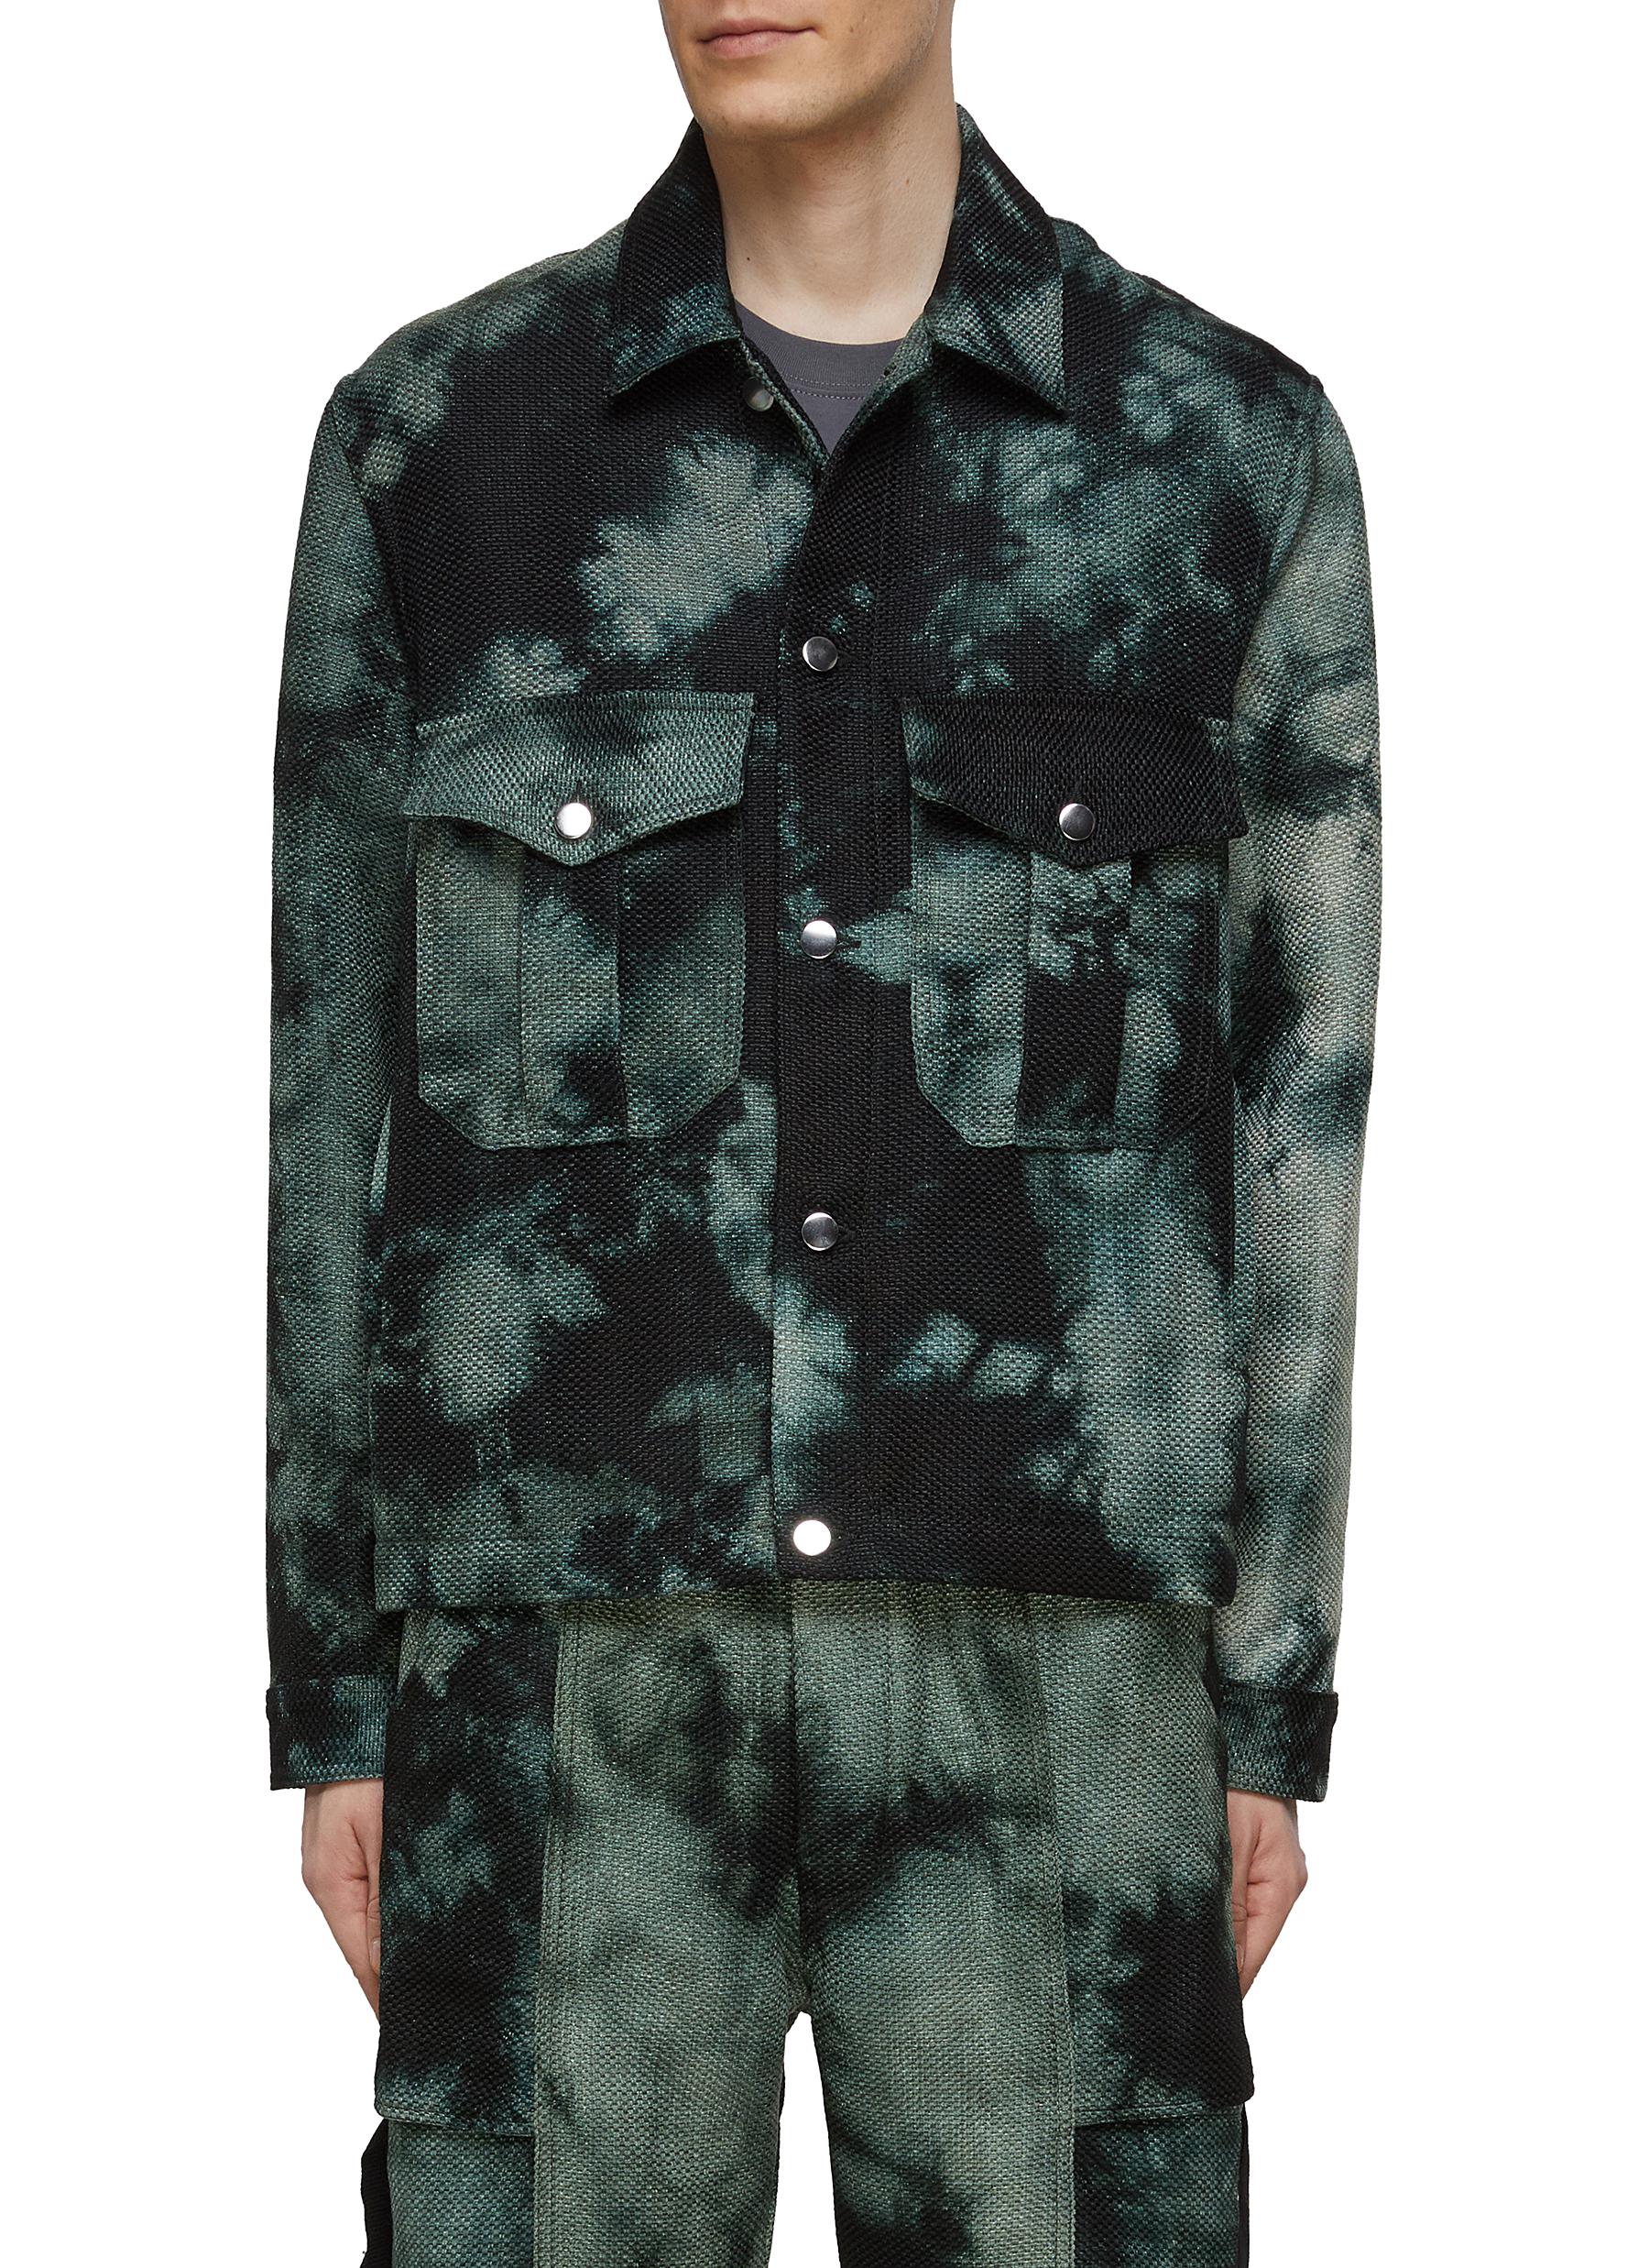 Tie Dyed Military Jacket